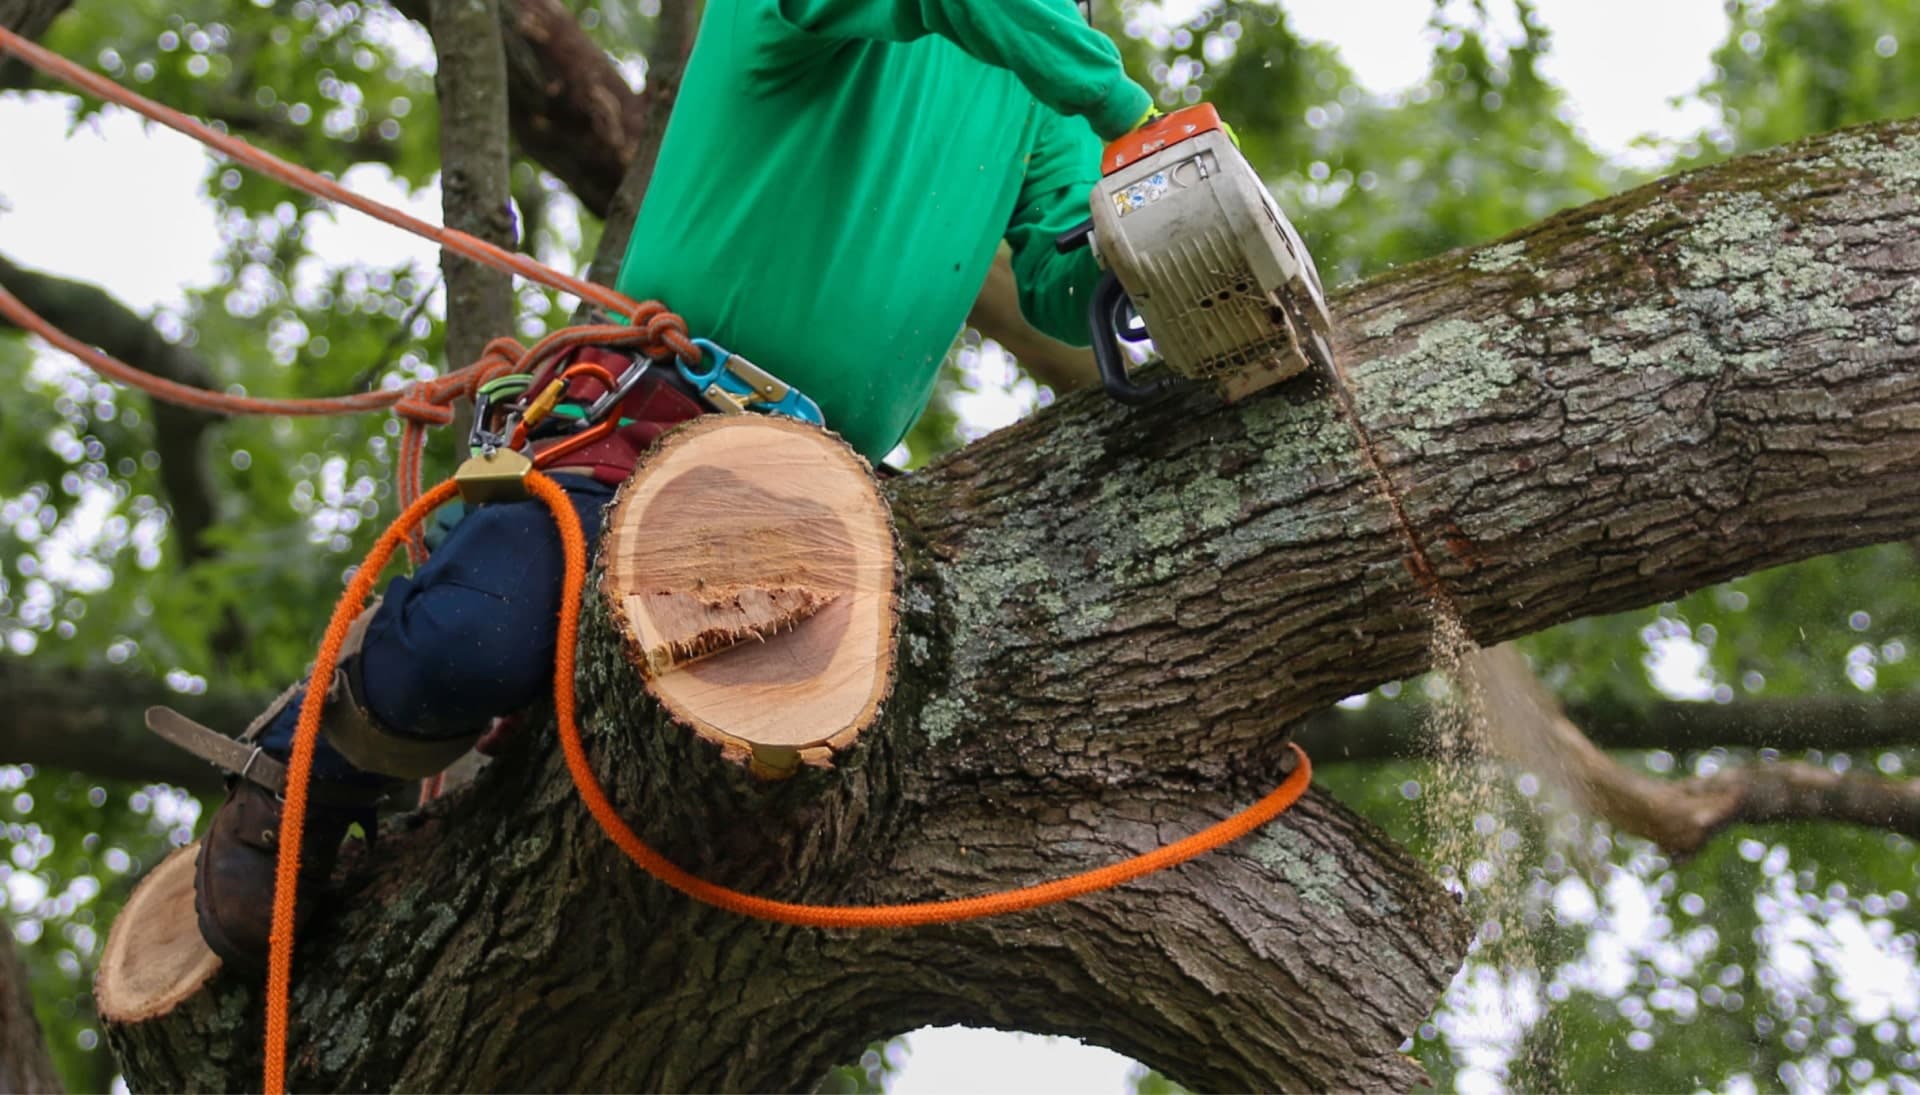 Tree removal expert wears green shirt while tree trimming